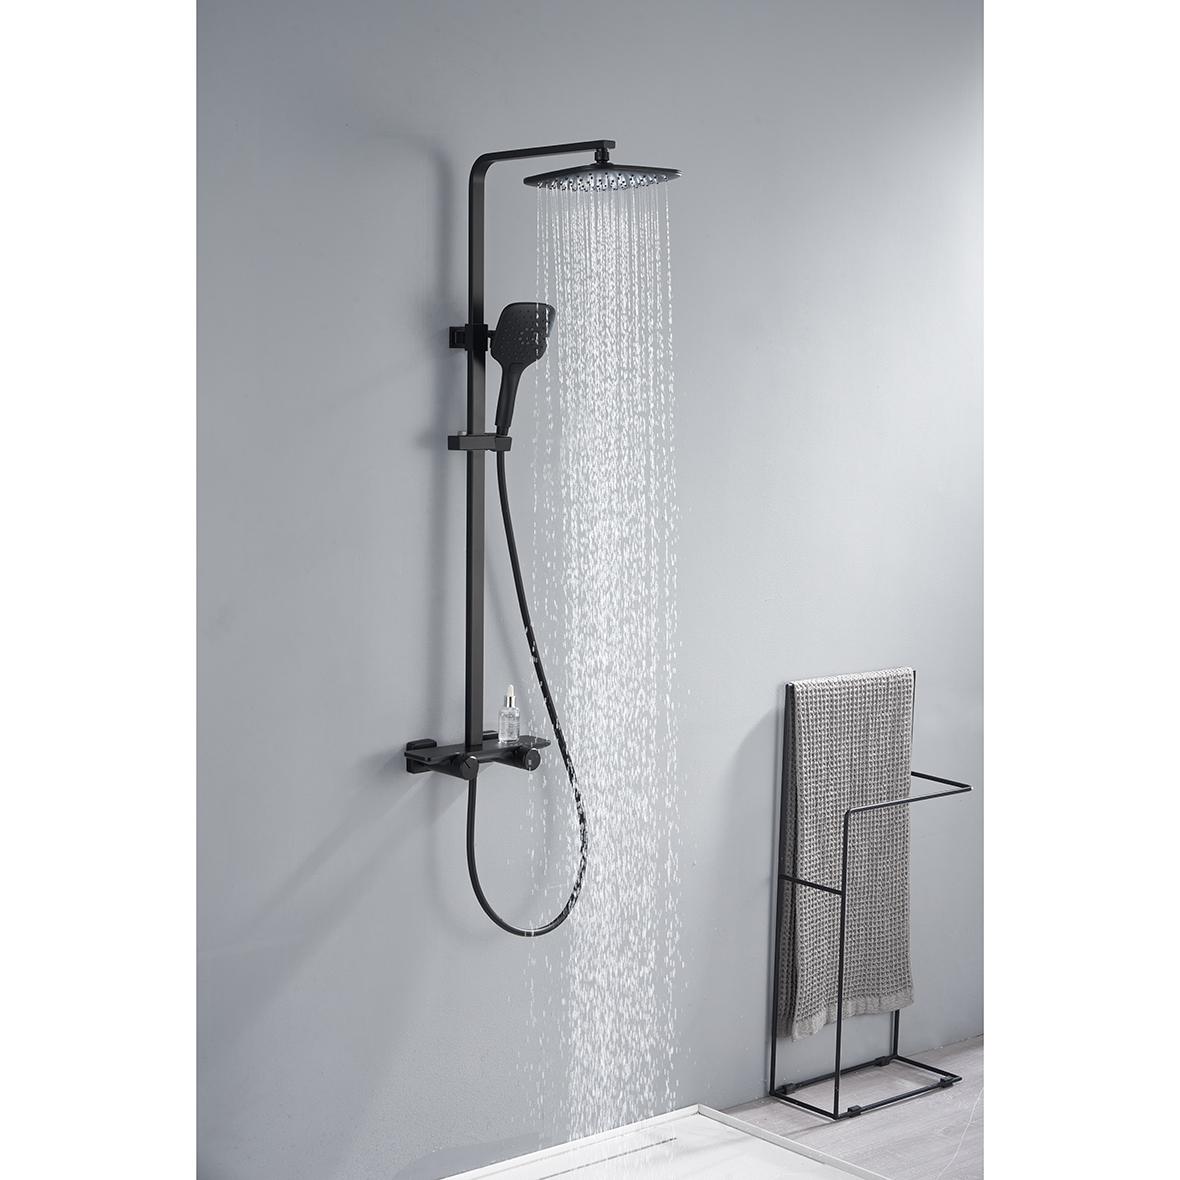 The versatile design of the shower set: create a personalized shower experience